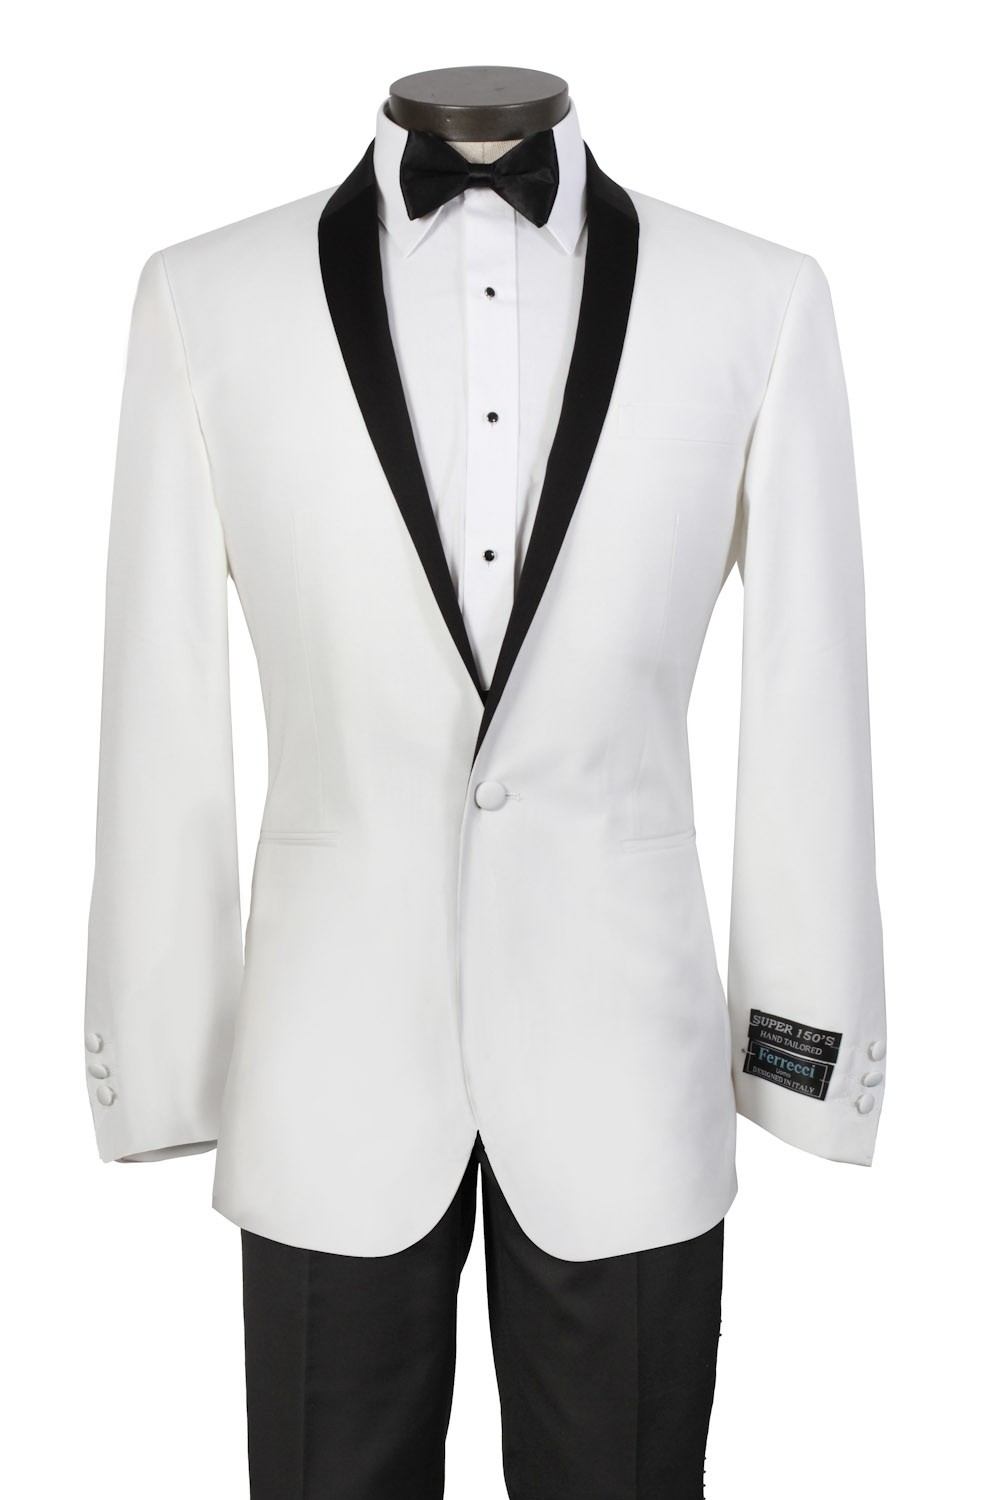 White Slim Fit Tuxedo With Black Shawl Lapel   Includes Black Trousers